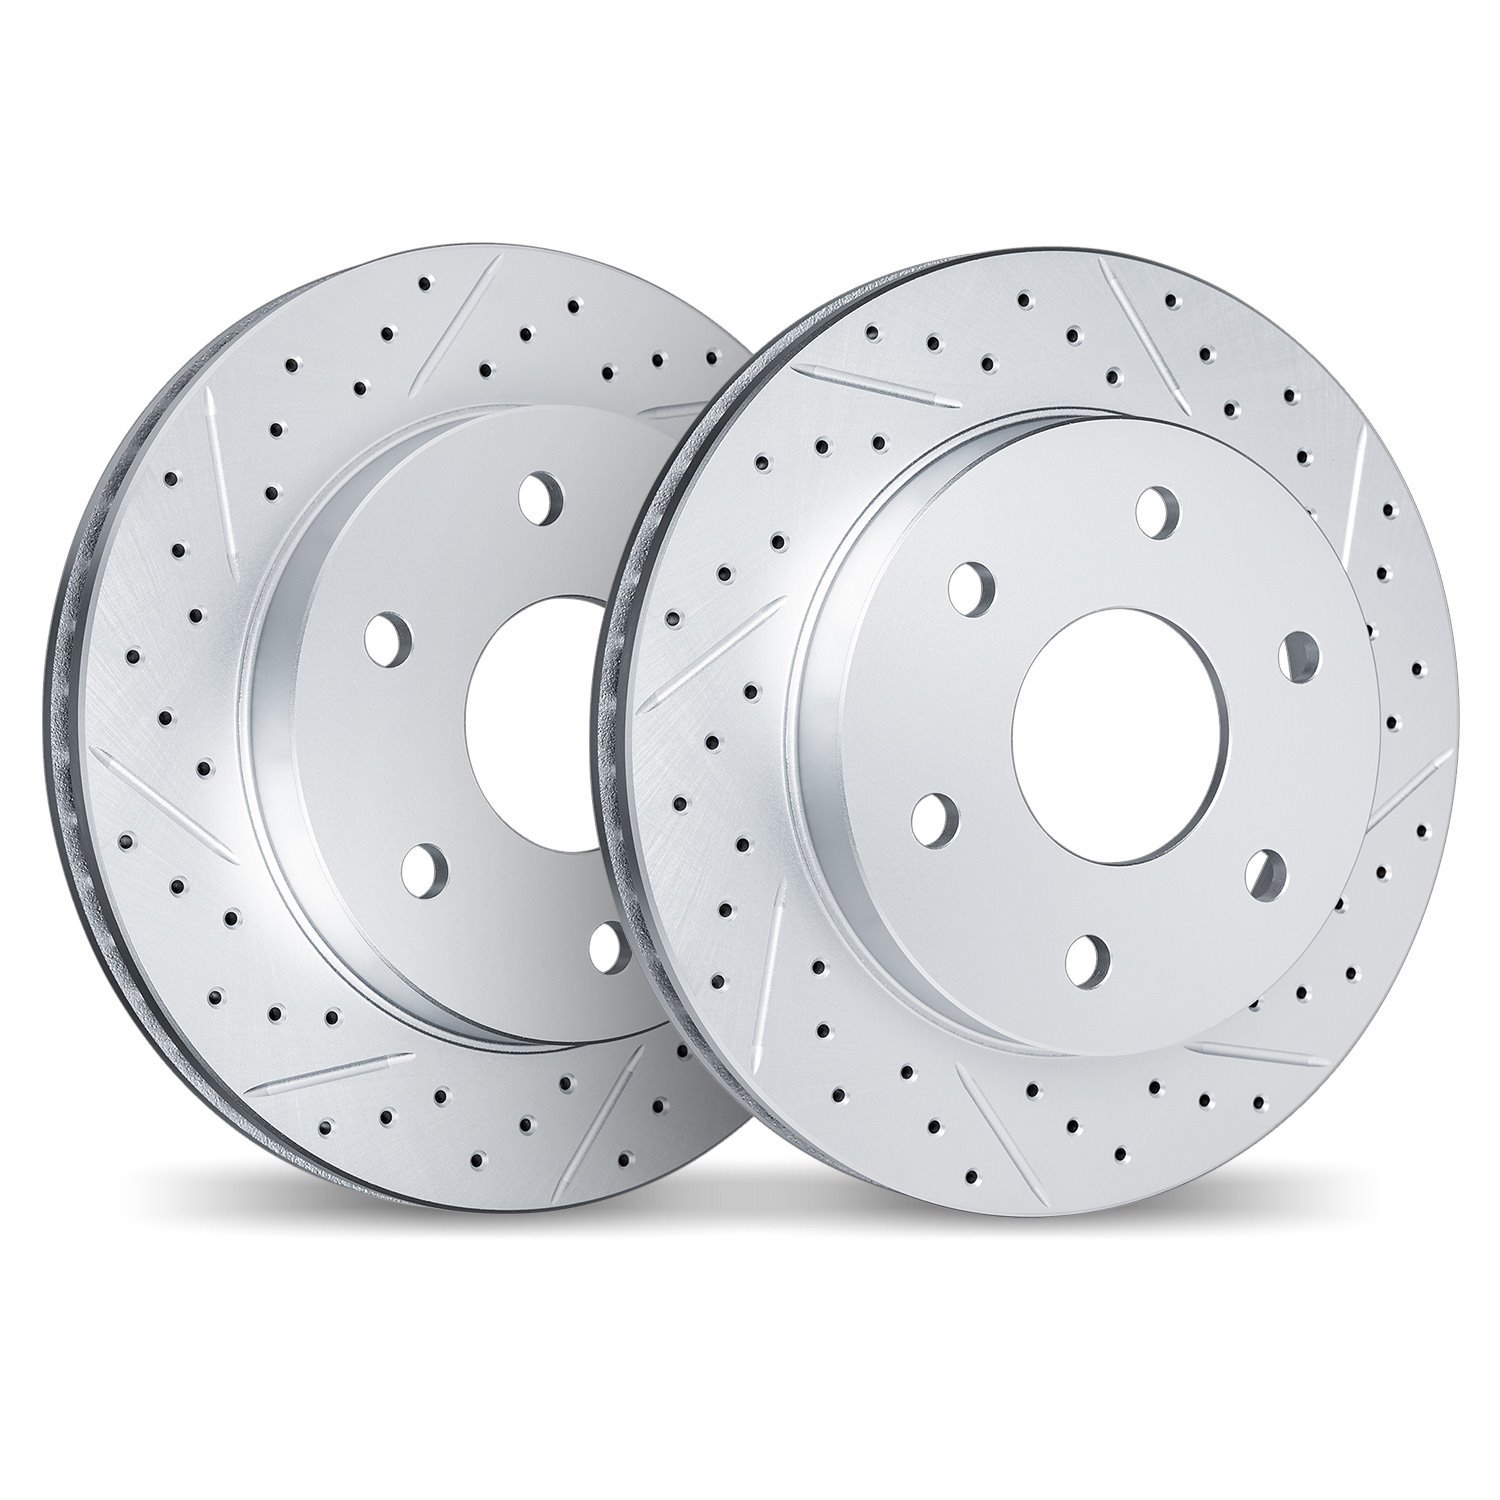 2002-46033 Geoperformance Drilled/Slotted Brake Rotors, 2010-2016 GM, Position: Rear